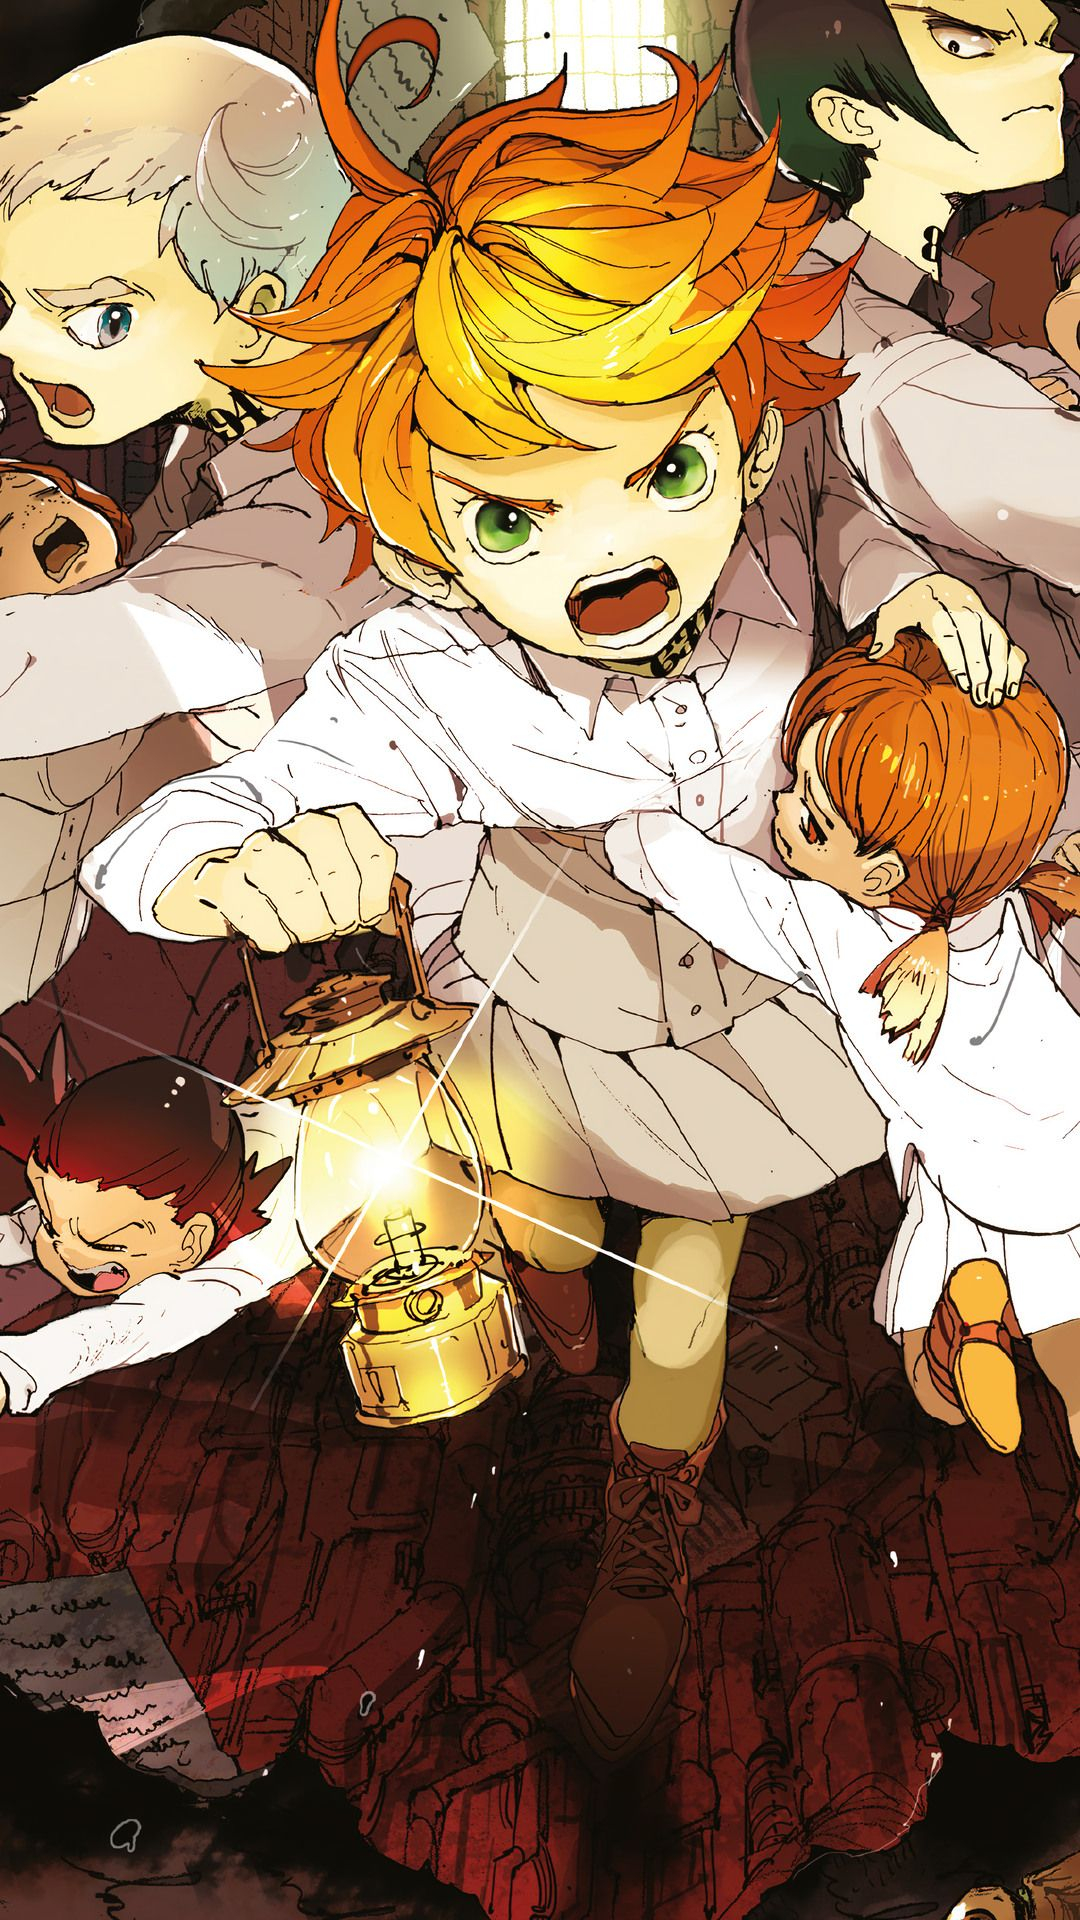 1080x1920 The Promised Neverland Wallpapers [Desktop,iPhone,Laptop,Android